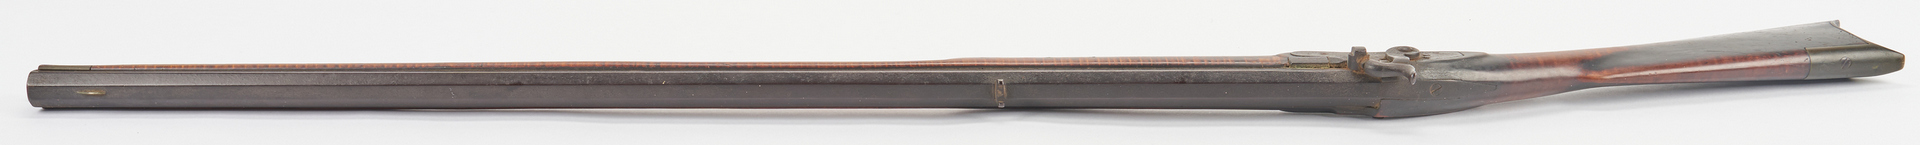 Lot 619: Mid-Atlantic or Southern Tiger Maple Long Rifle